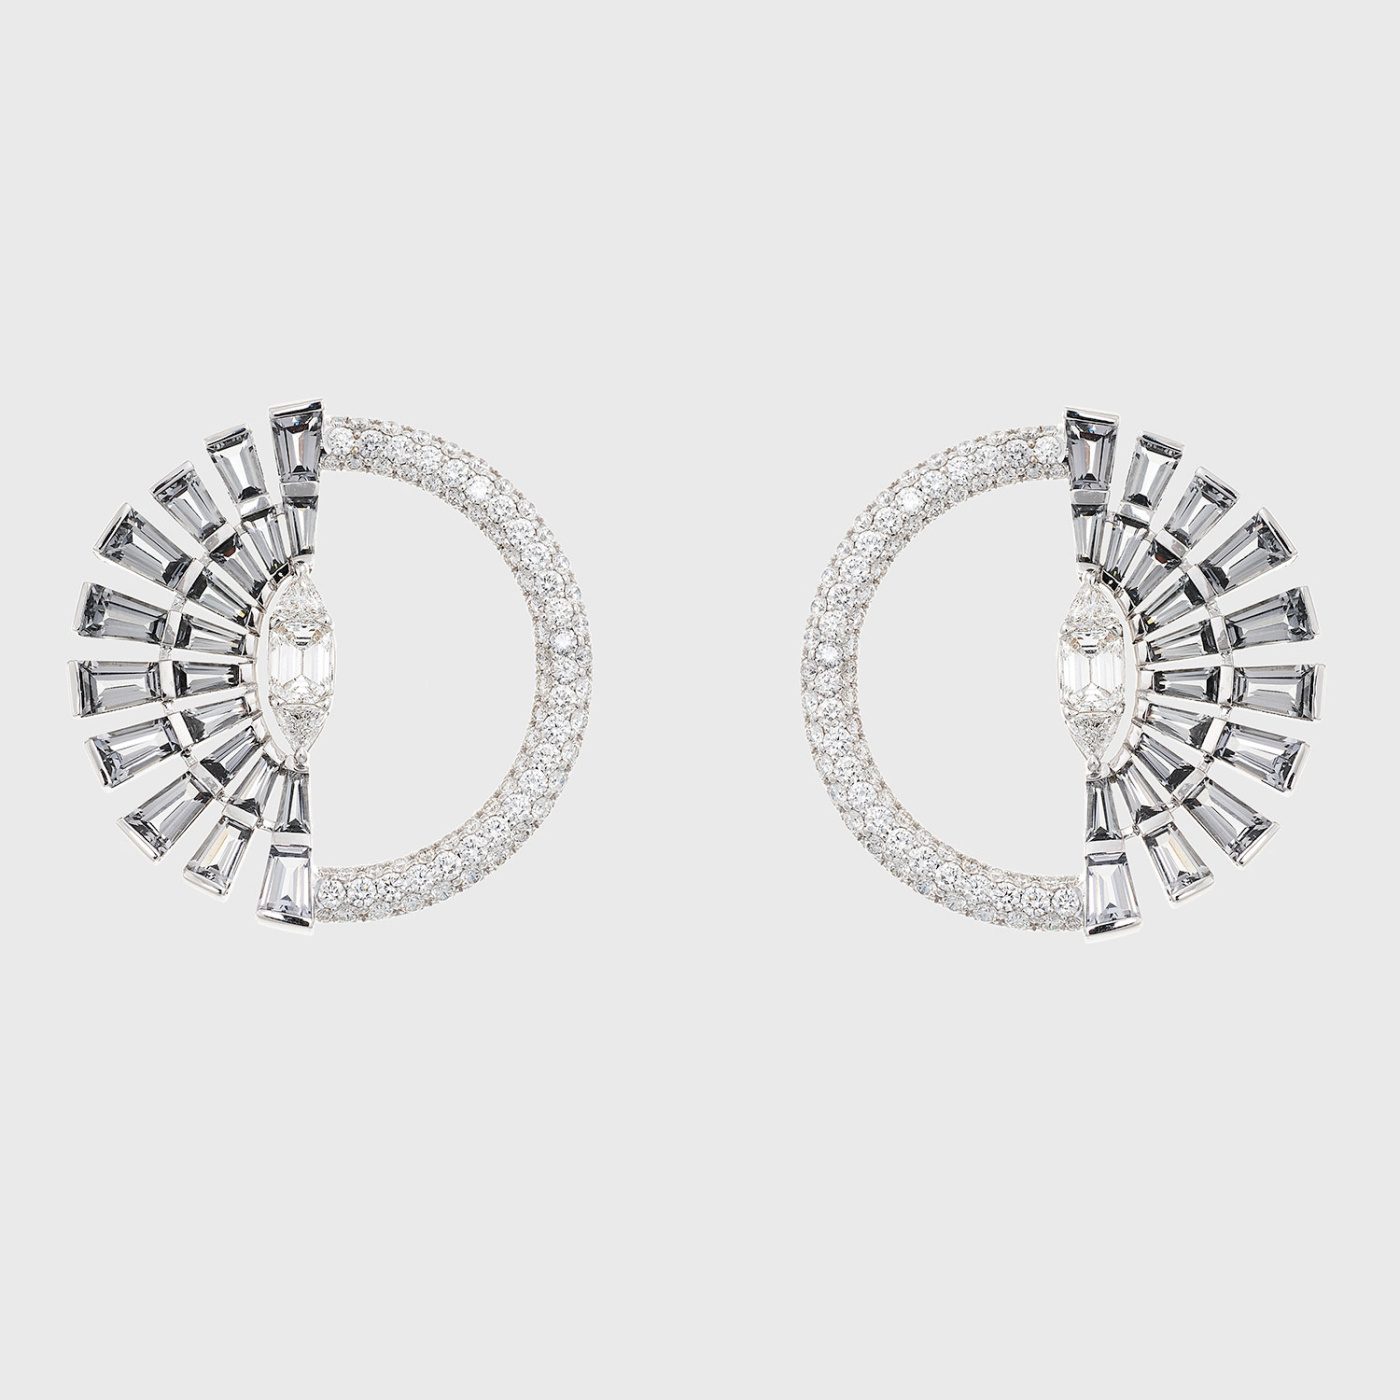 White gold hoop earrings with white diamonds and grey spinnels